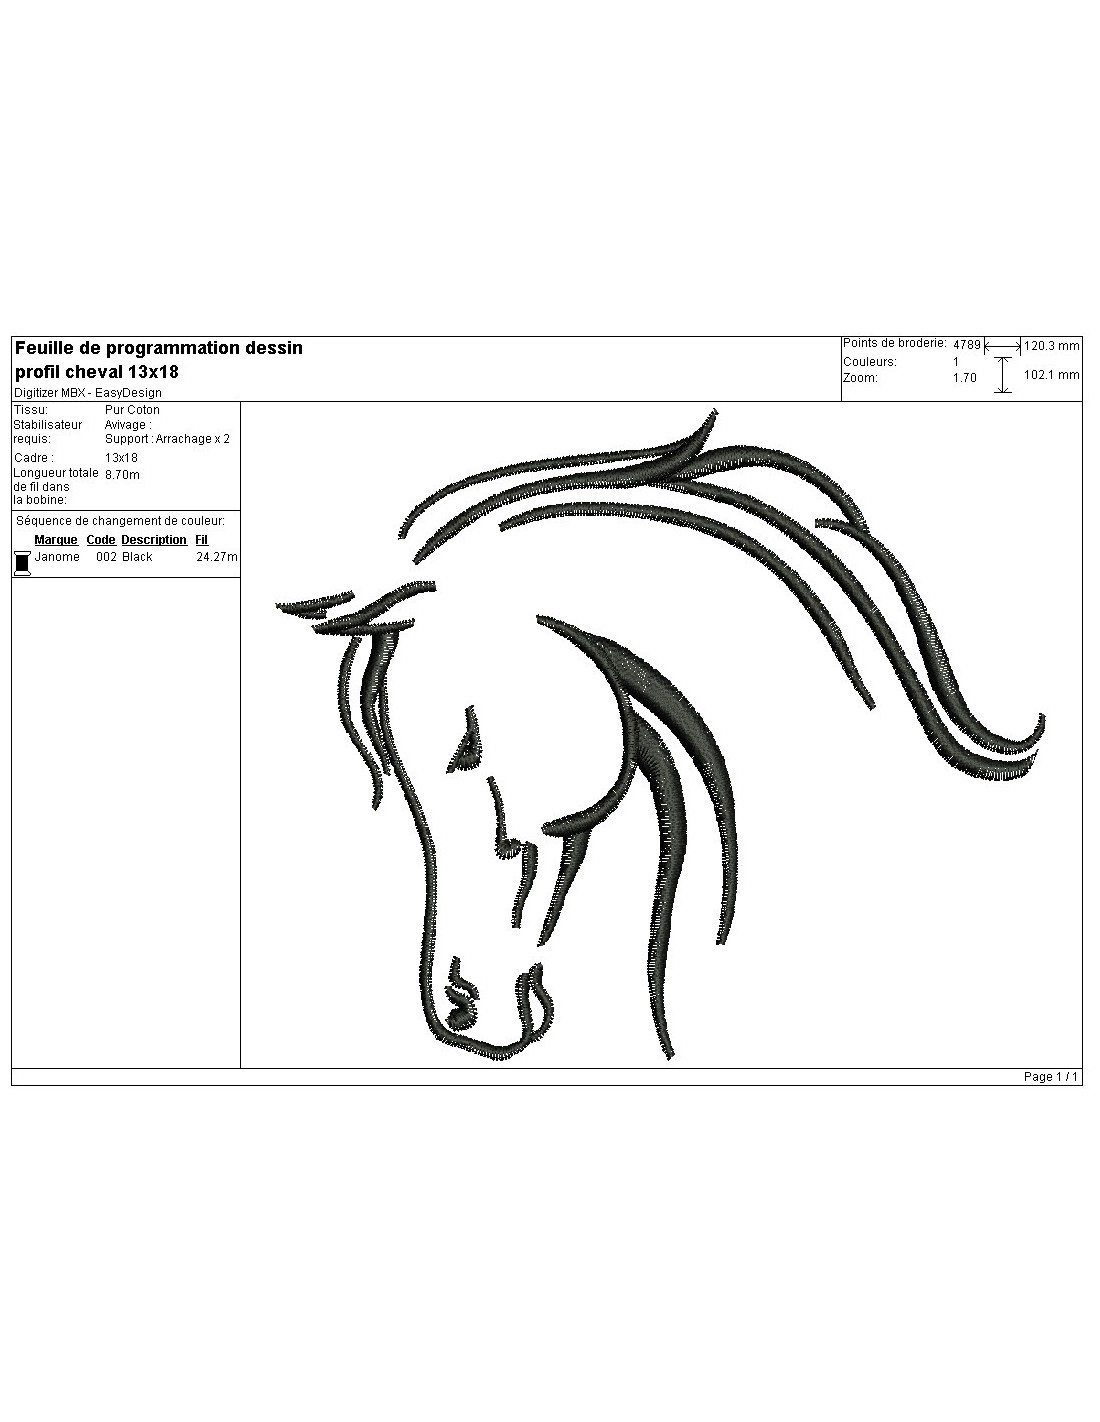 Instant Download Horse Head Embroidery Design